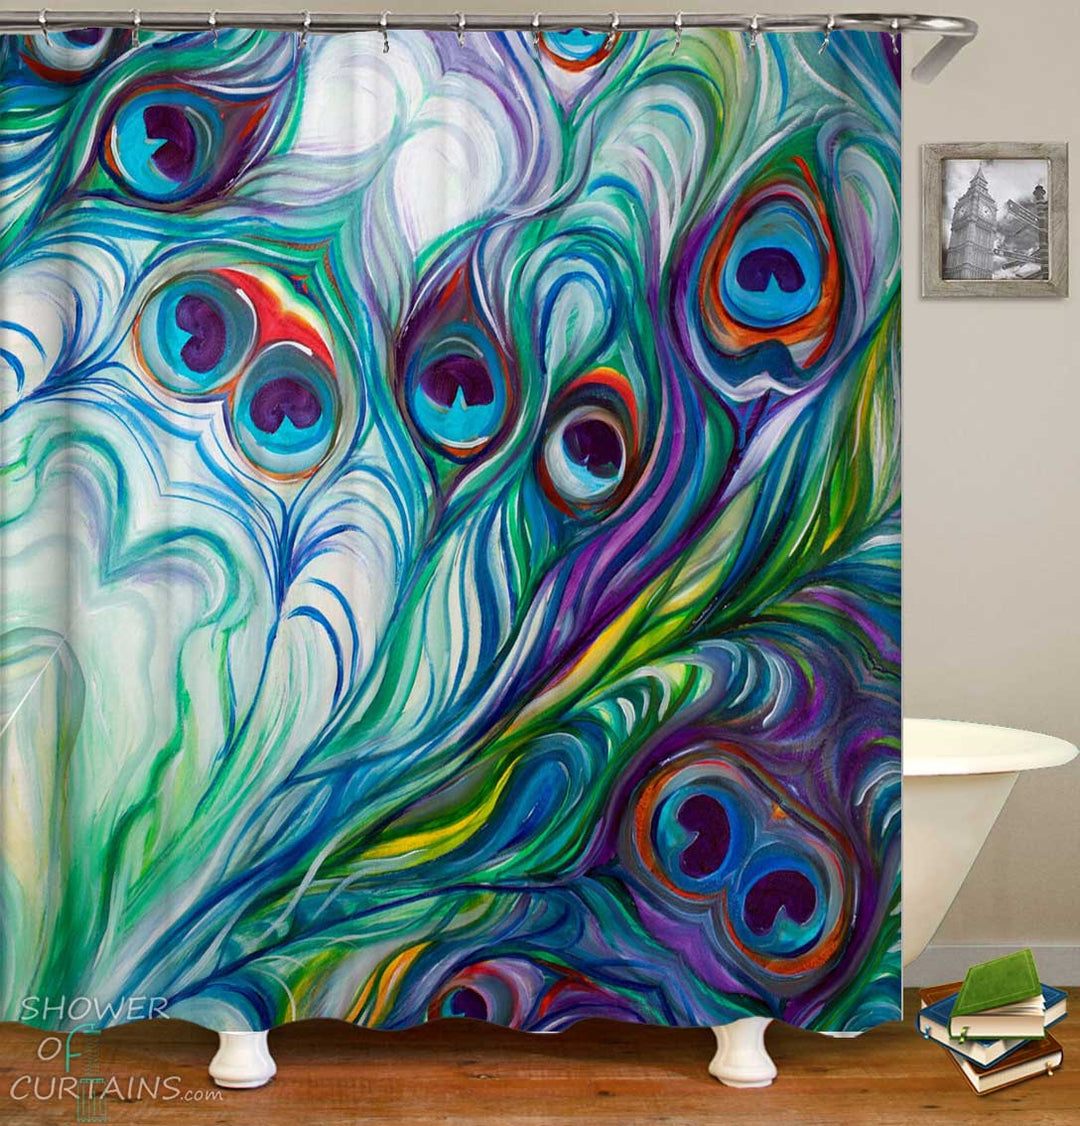 Shower Curtains with Colorful Peacock Feathers